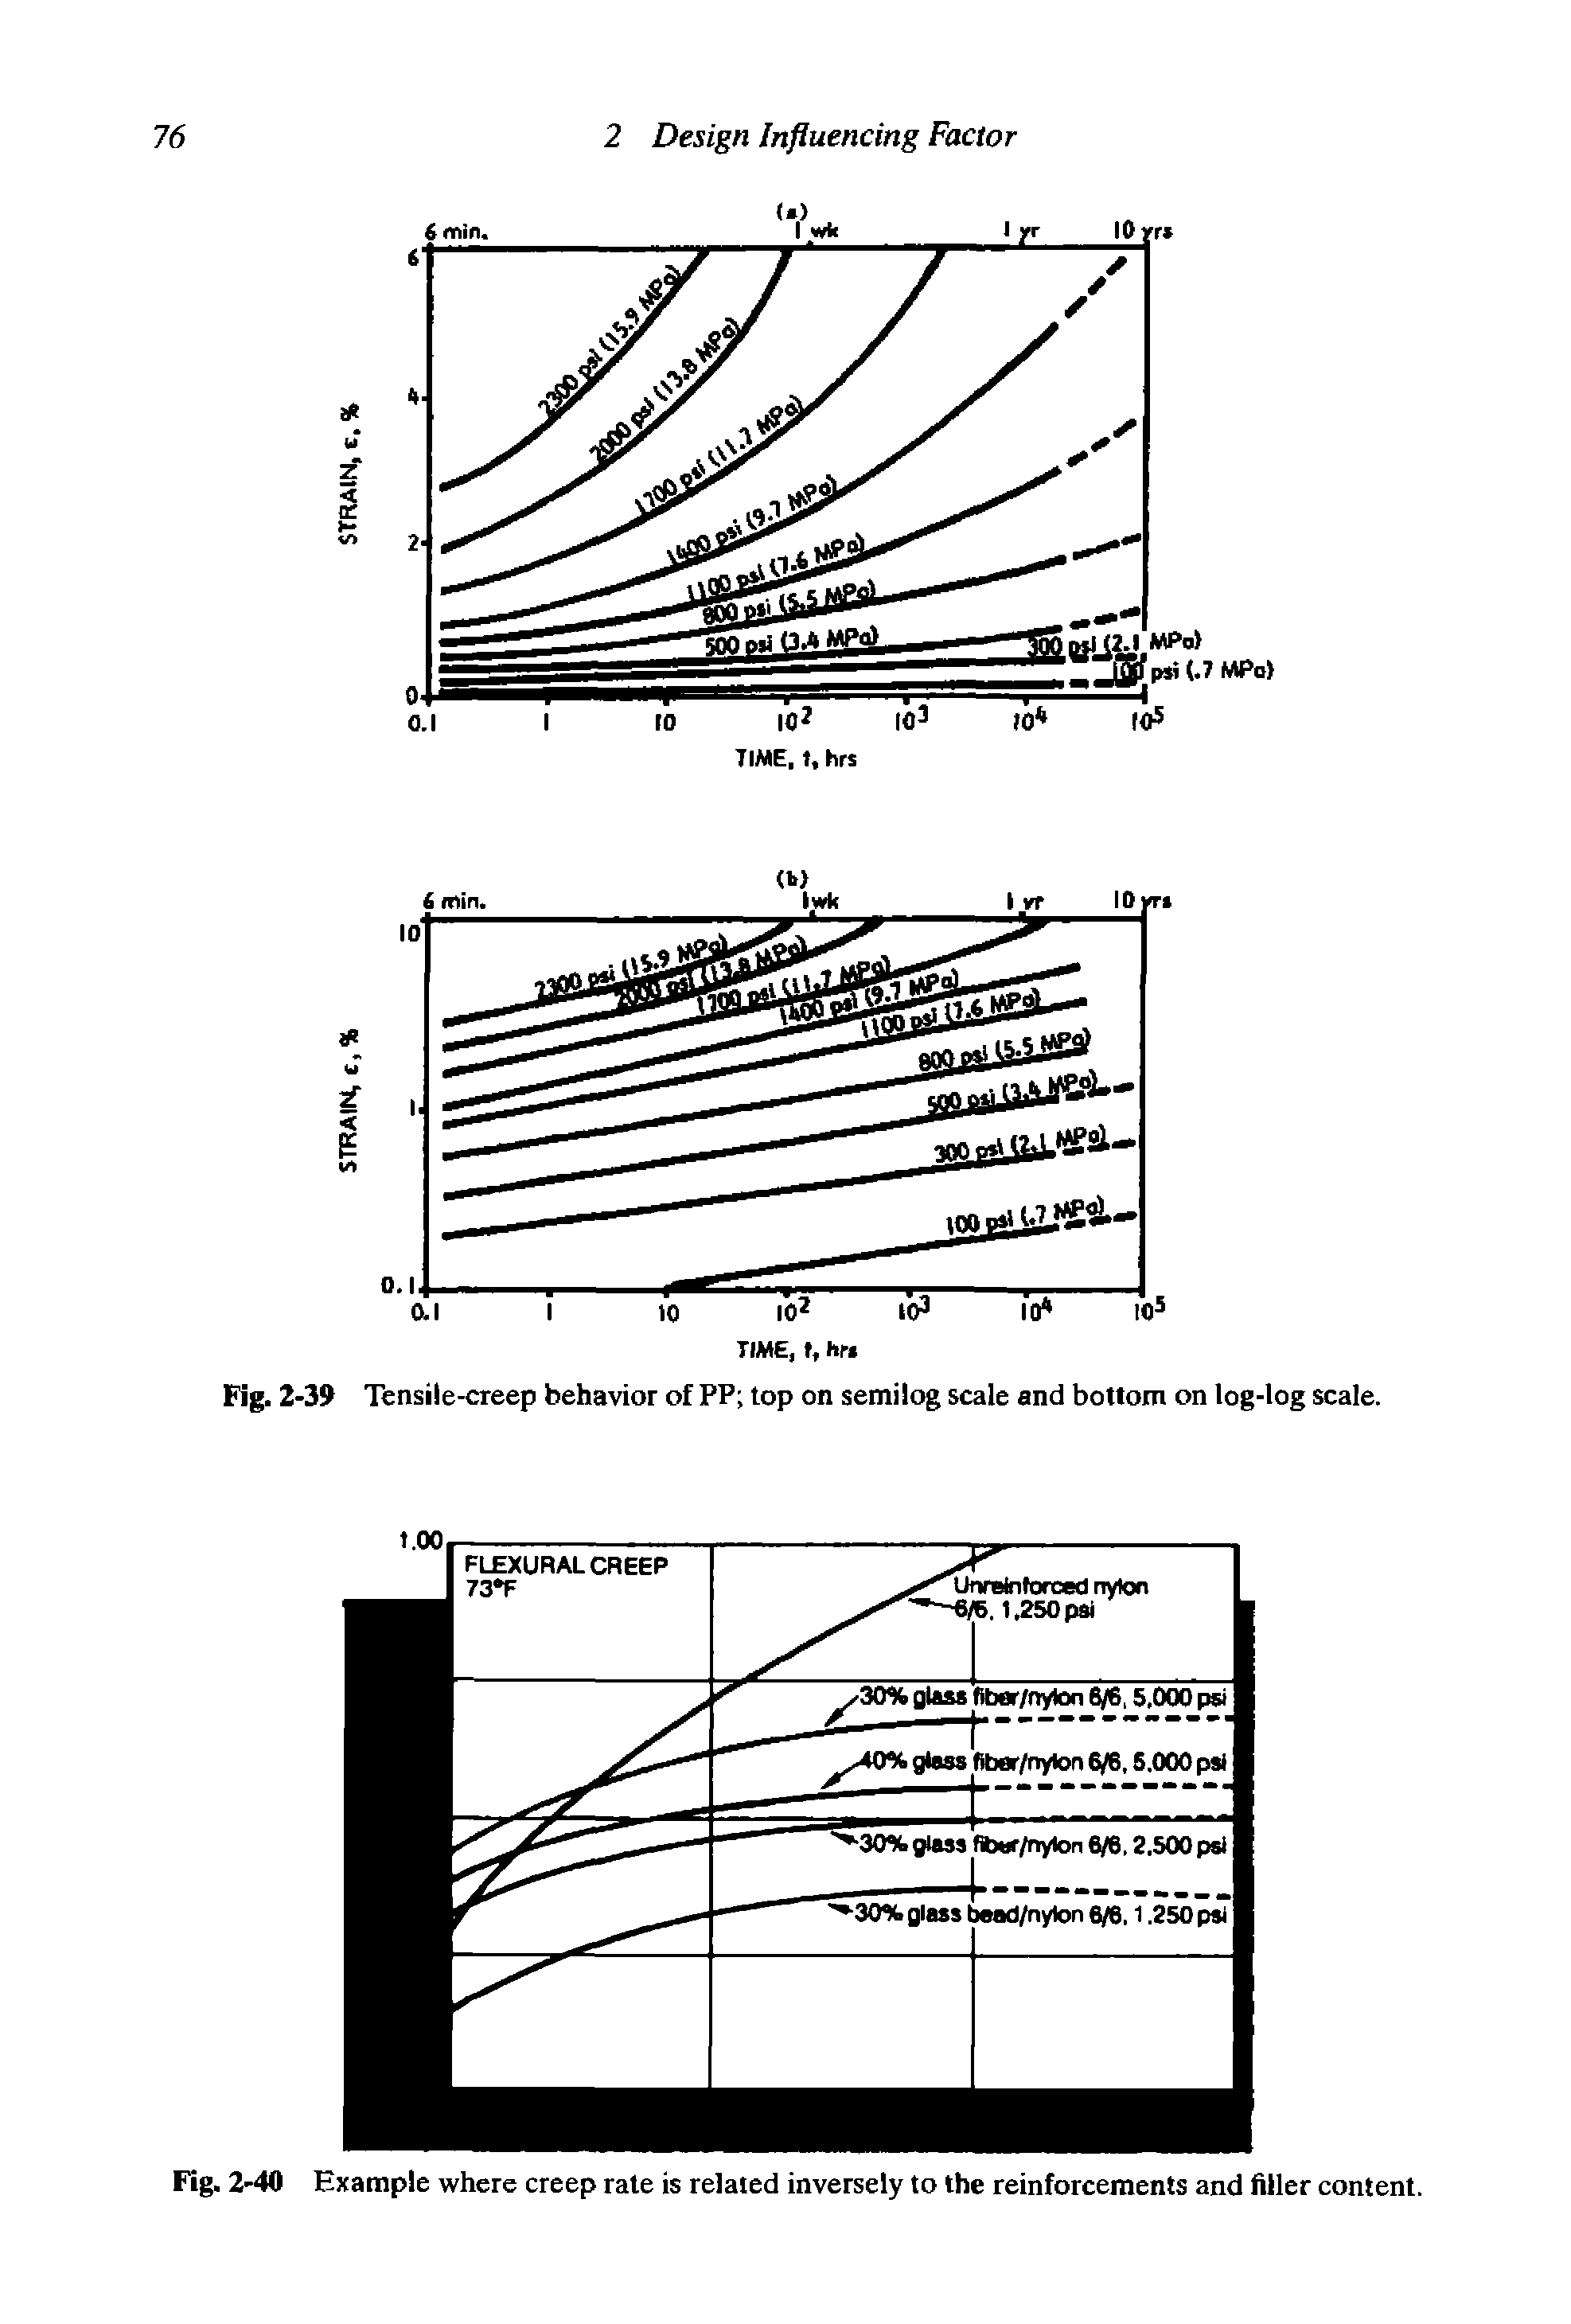 Fig. 2-39 Tensile-creep behavior of PP top on semilog scale and bottom on log-log scale.